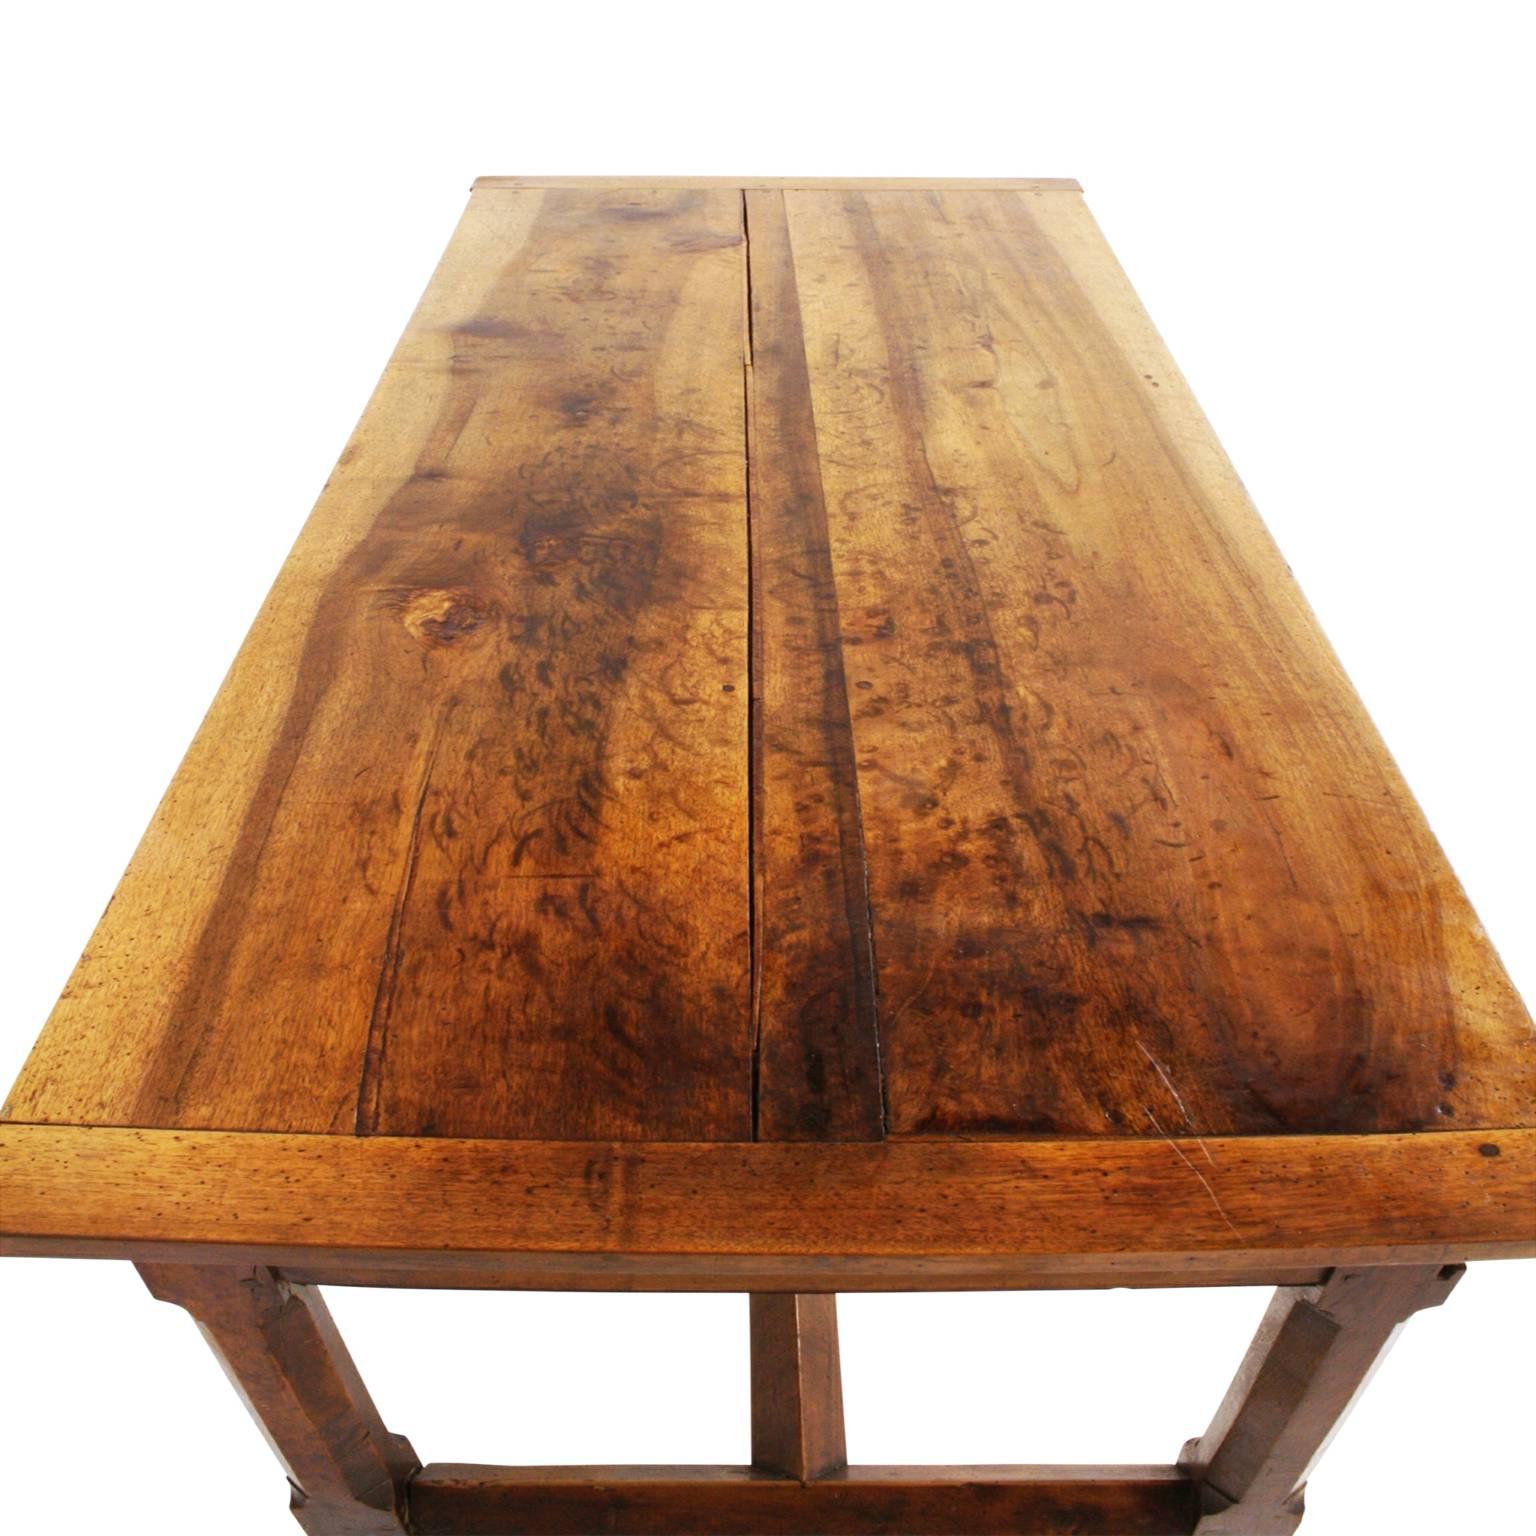 Beautiful walnut table with exceptional patina and wear patterns showing many years of use in the same household.

Features a standard drawer in the middle but where this piece stands out is the faux drawers on either side. Instead of pulling out,